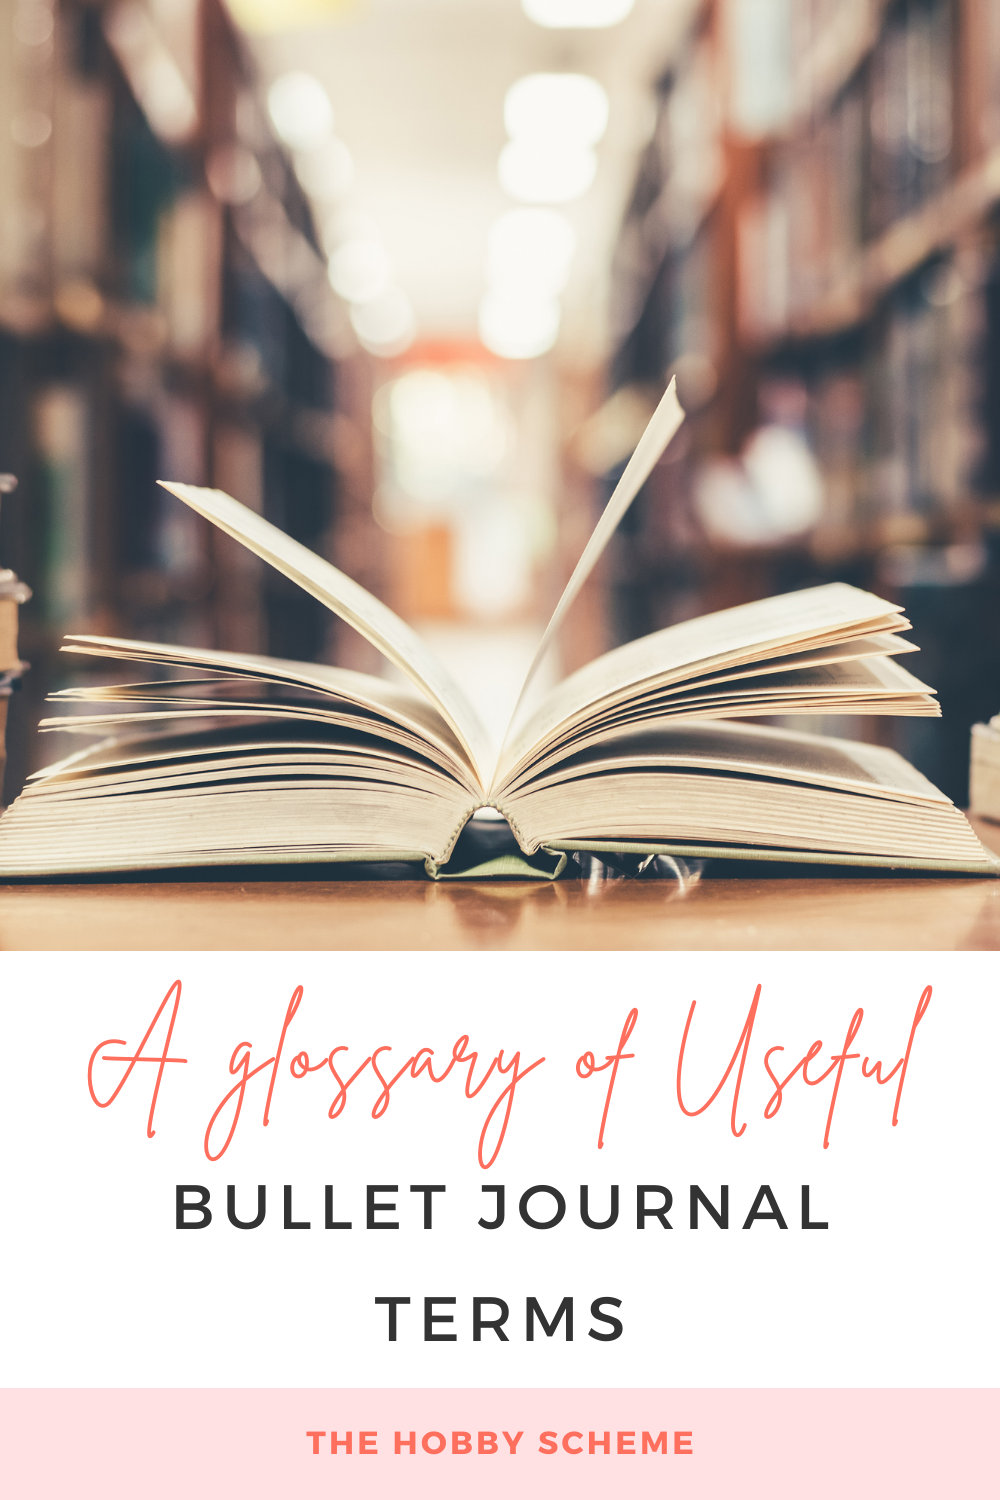 A Glossary of Useful Bullet Journal Terms